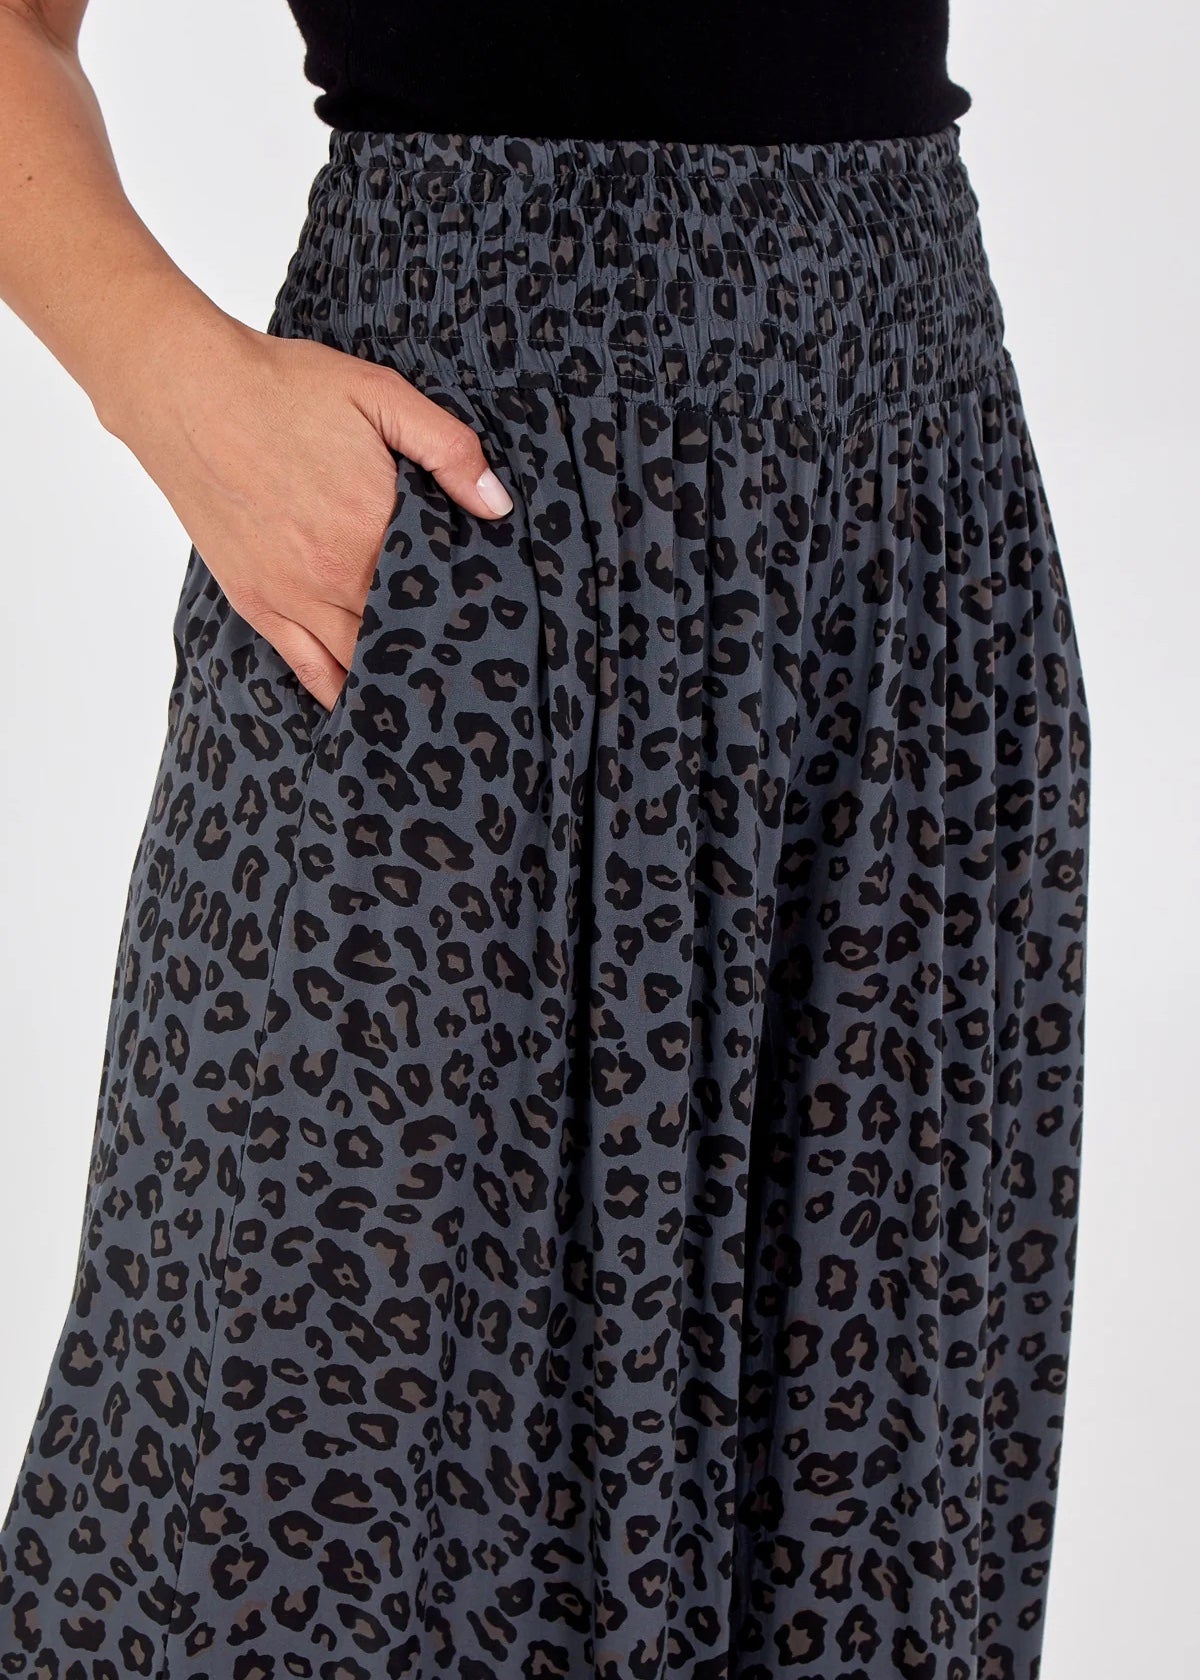 Sands - Culottes Animal Print / Charcoal